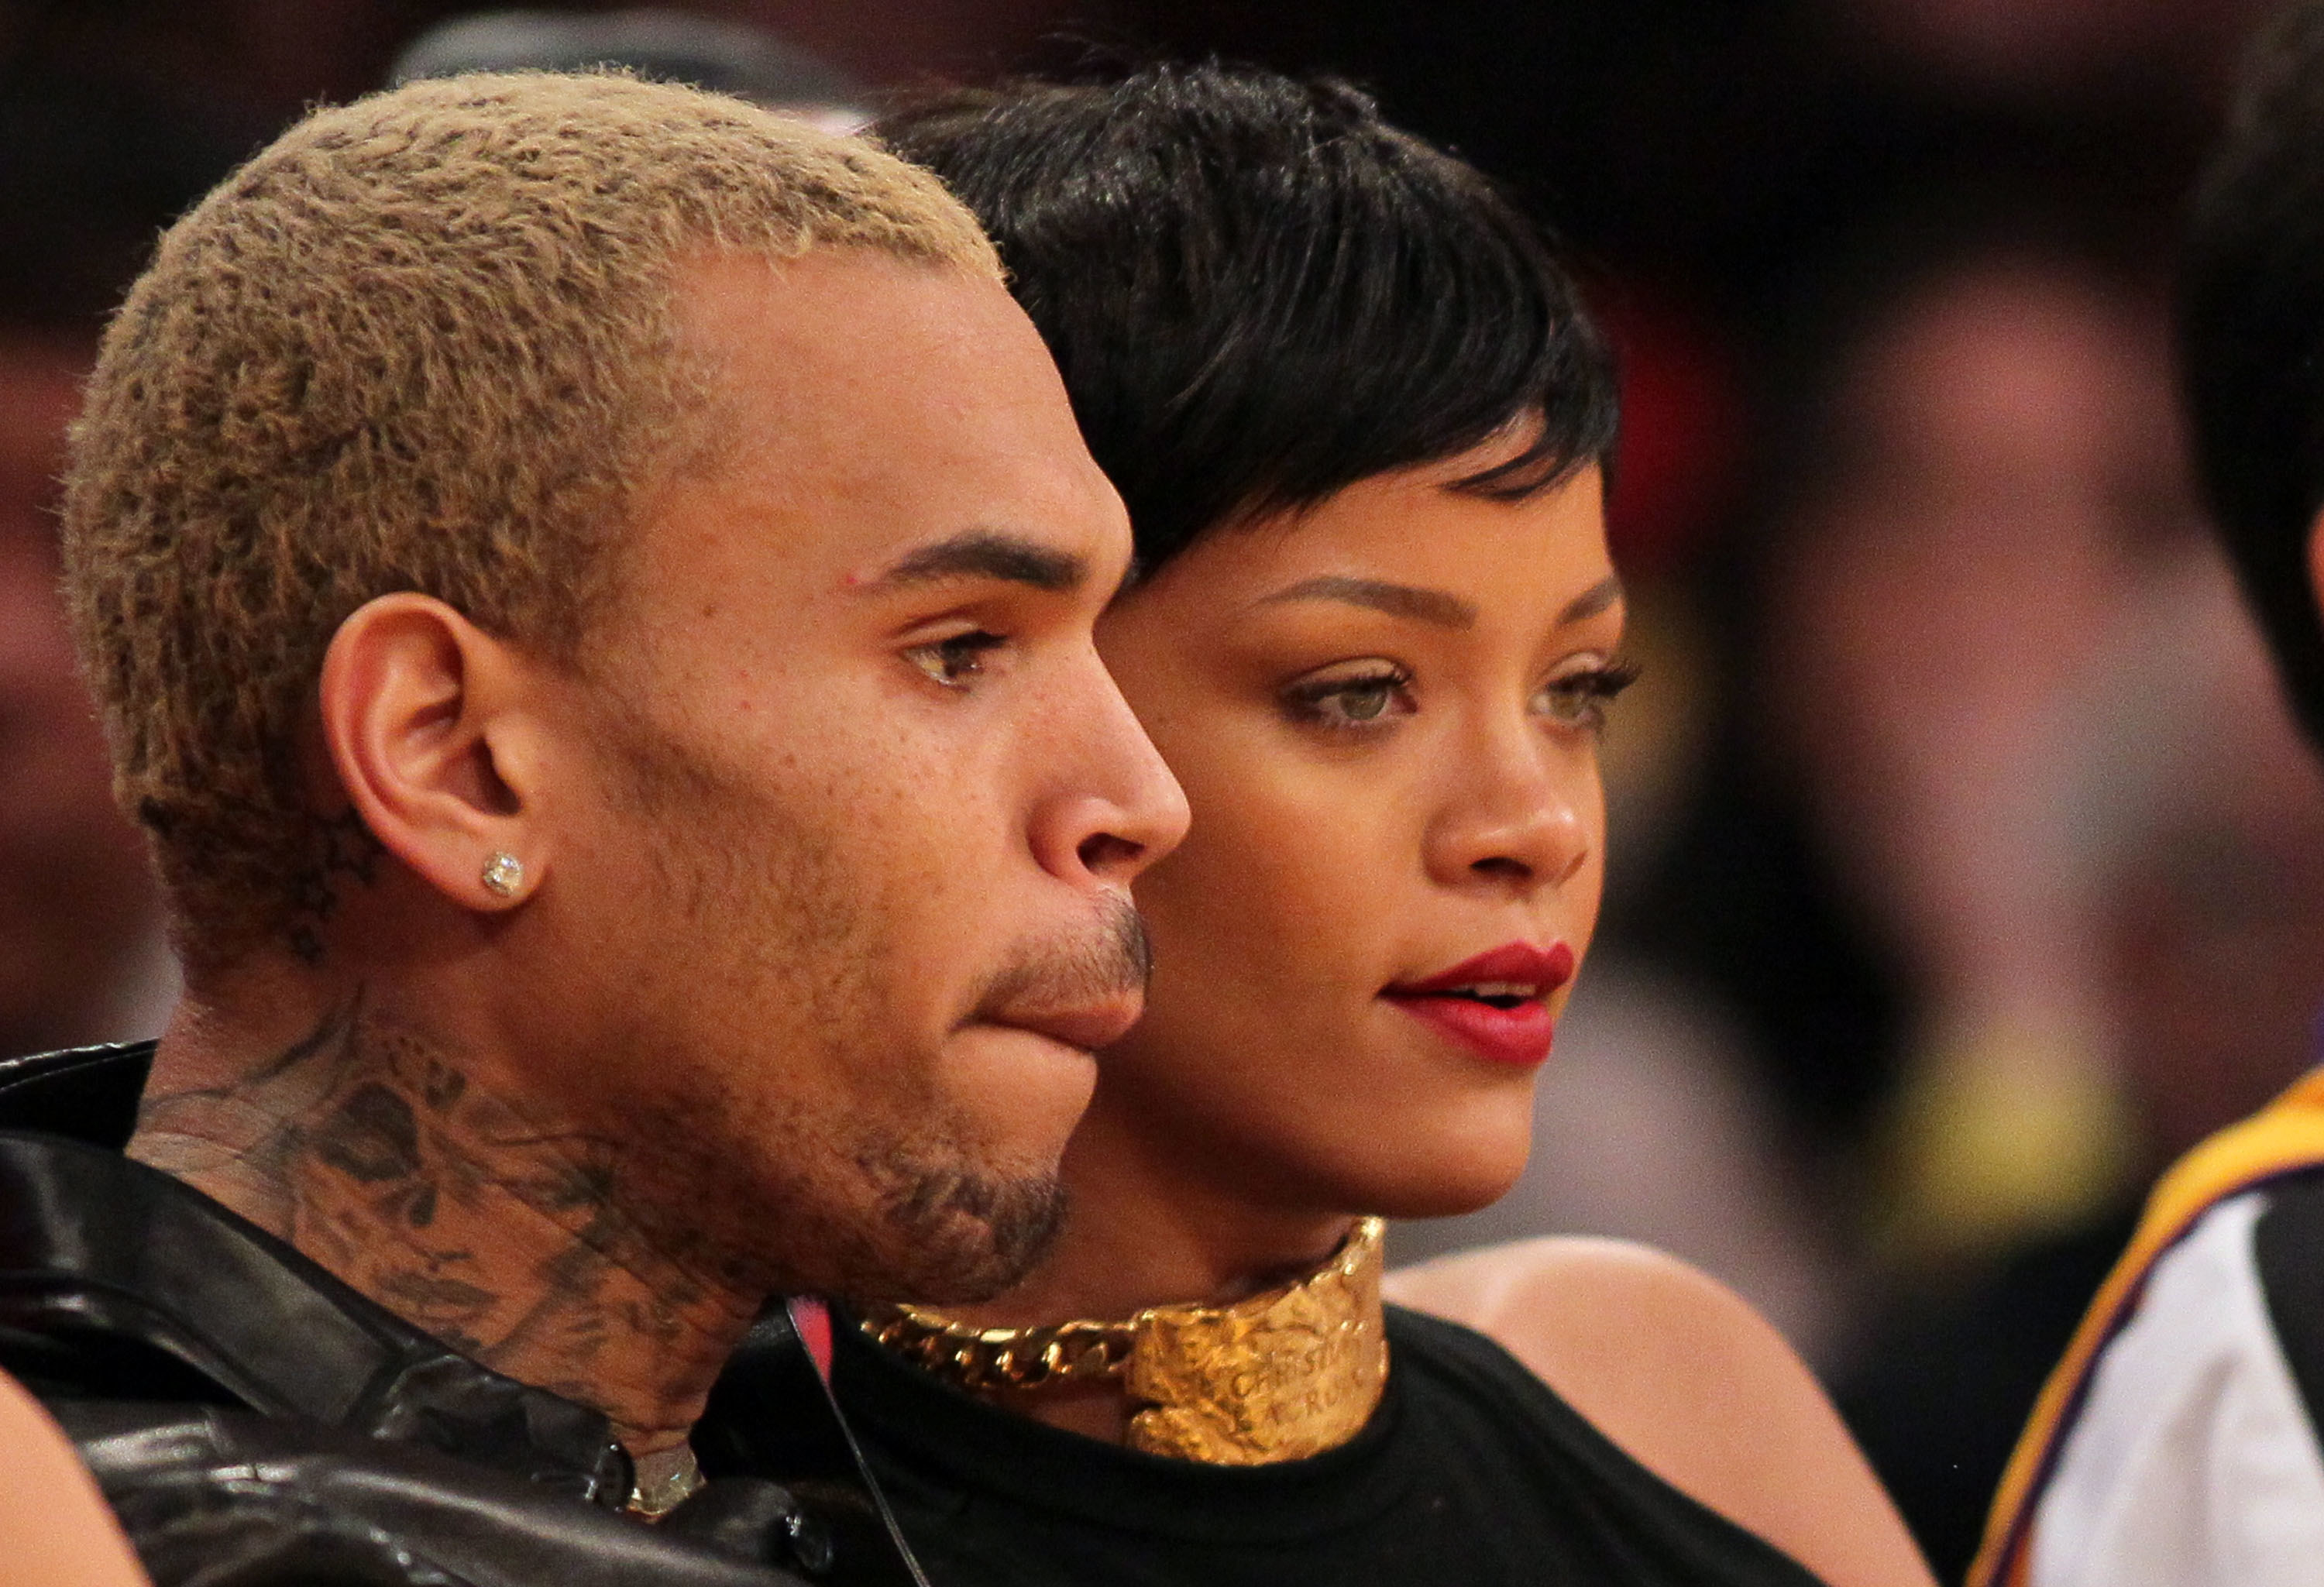 Chris Brown and Rihanna attend the NBA game between the New York Knicks and the Los Angeles Lakers at Staples Center on December 25, 2012